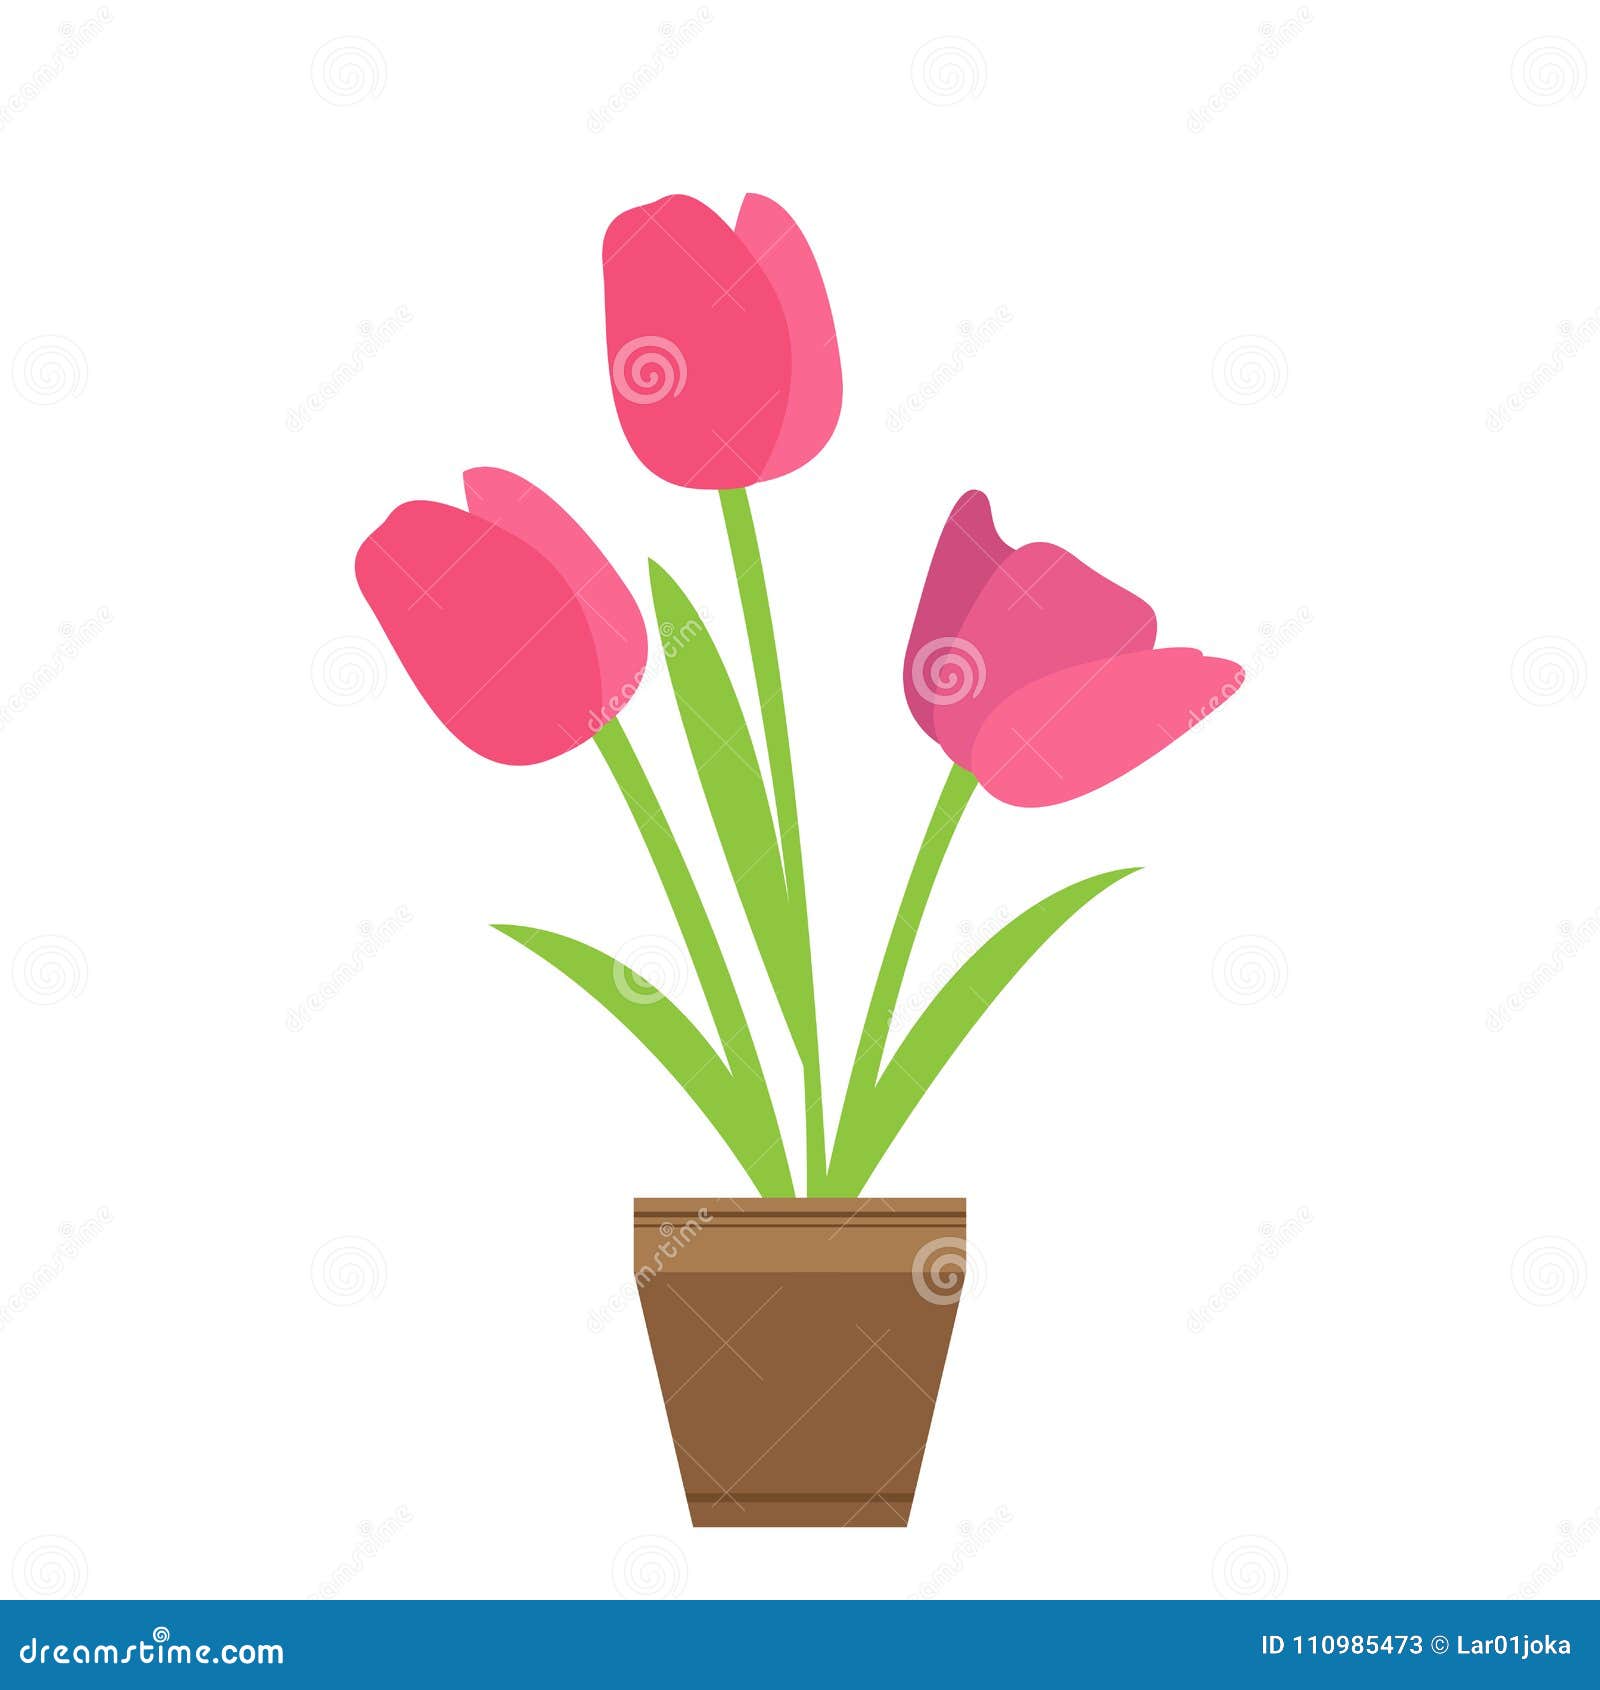 Cute rose on a pot stock vector. Illustration of green - 110985473